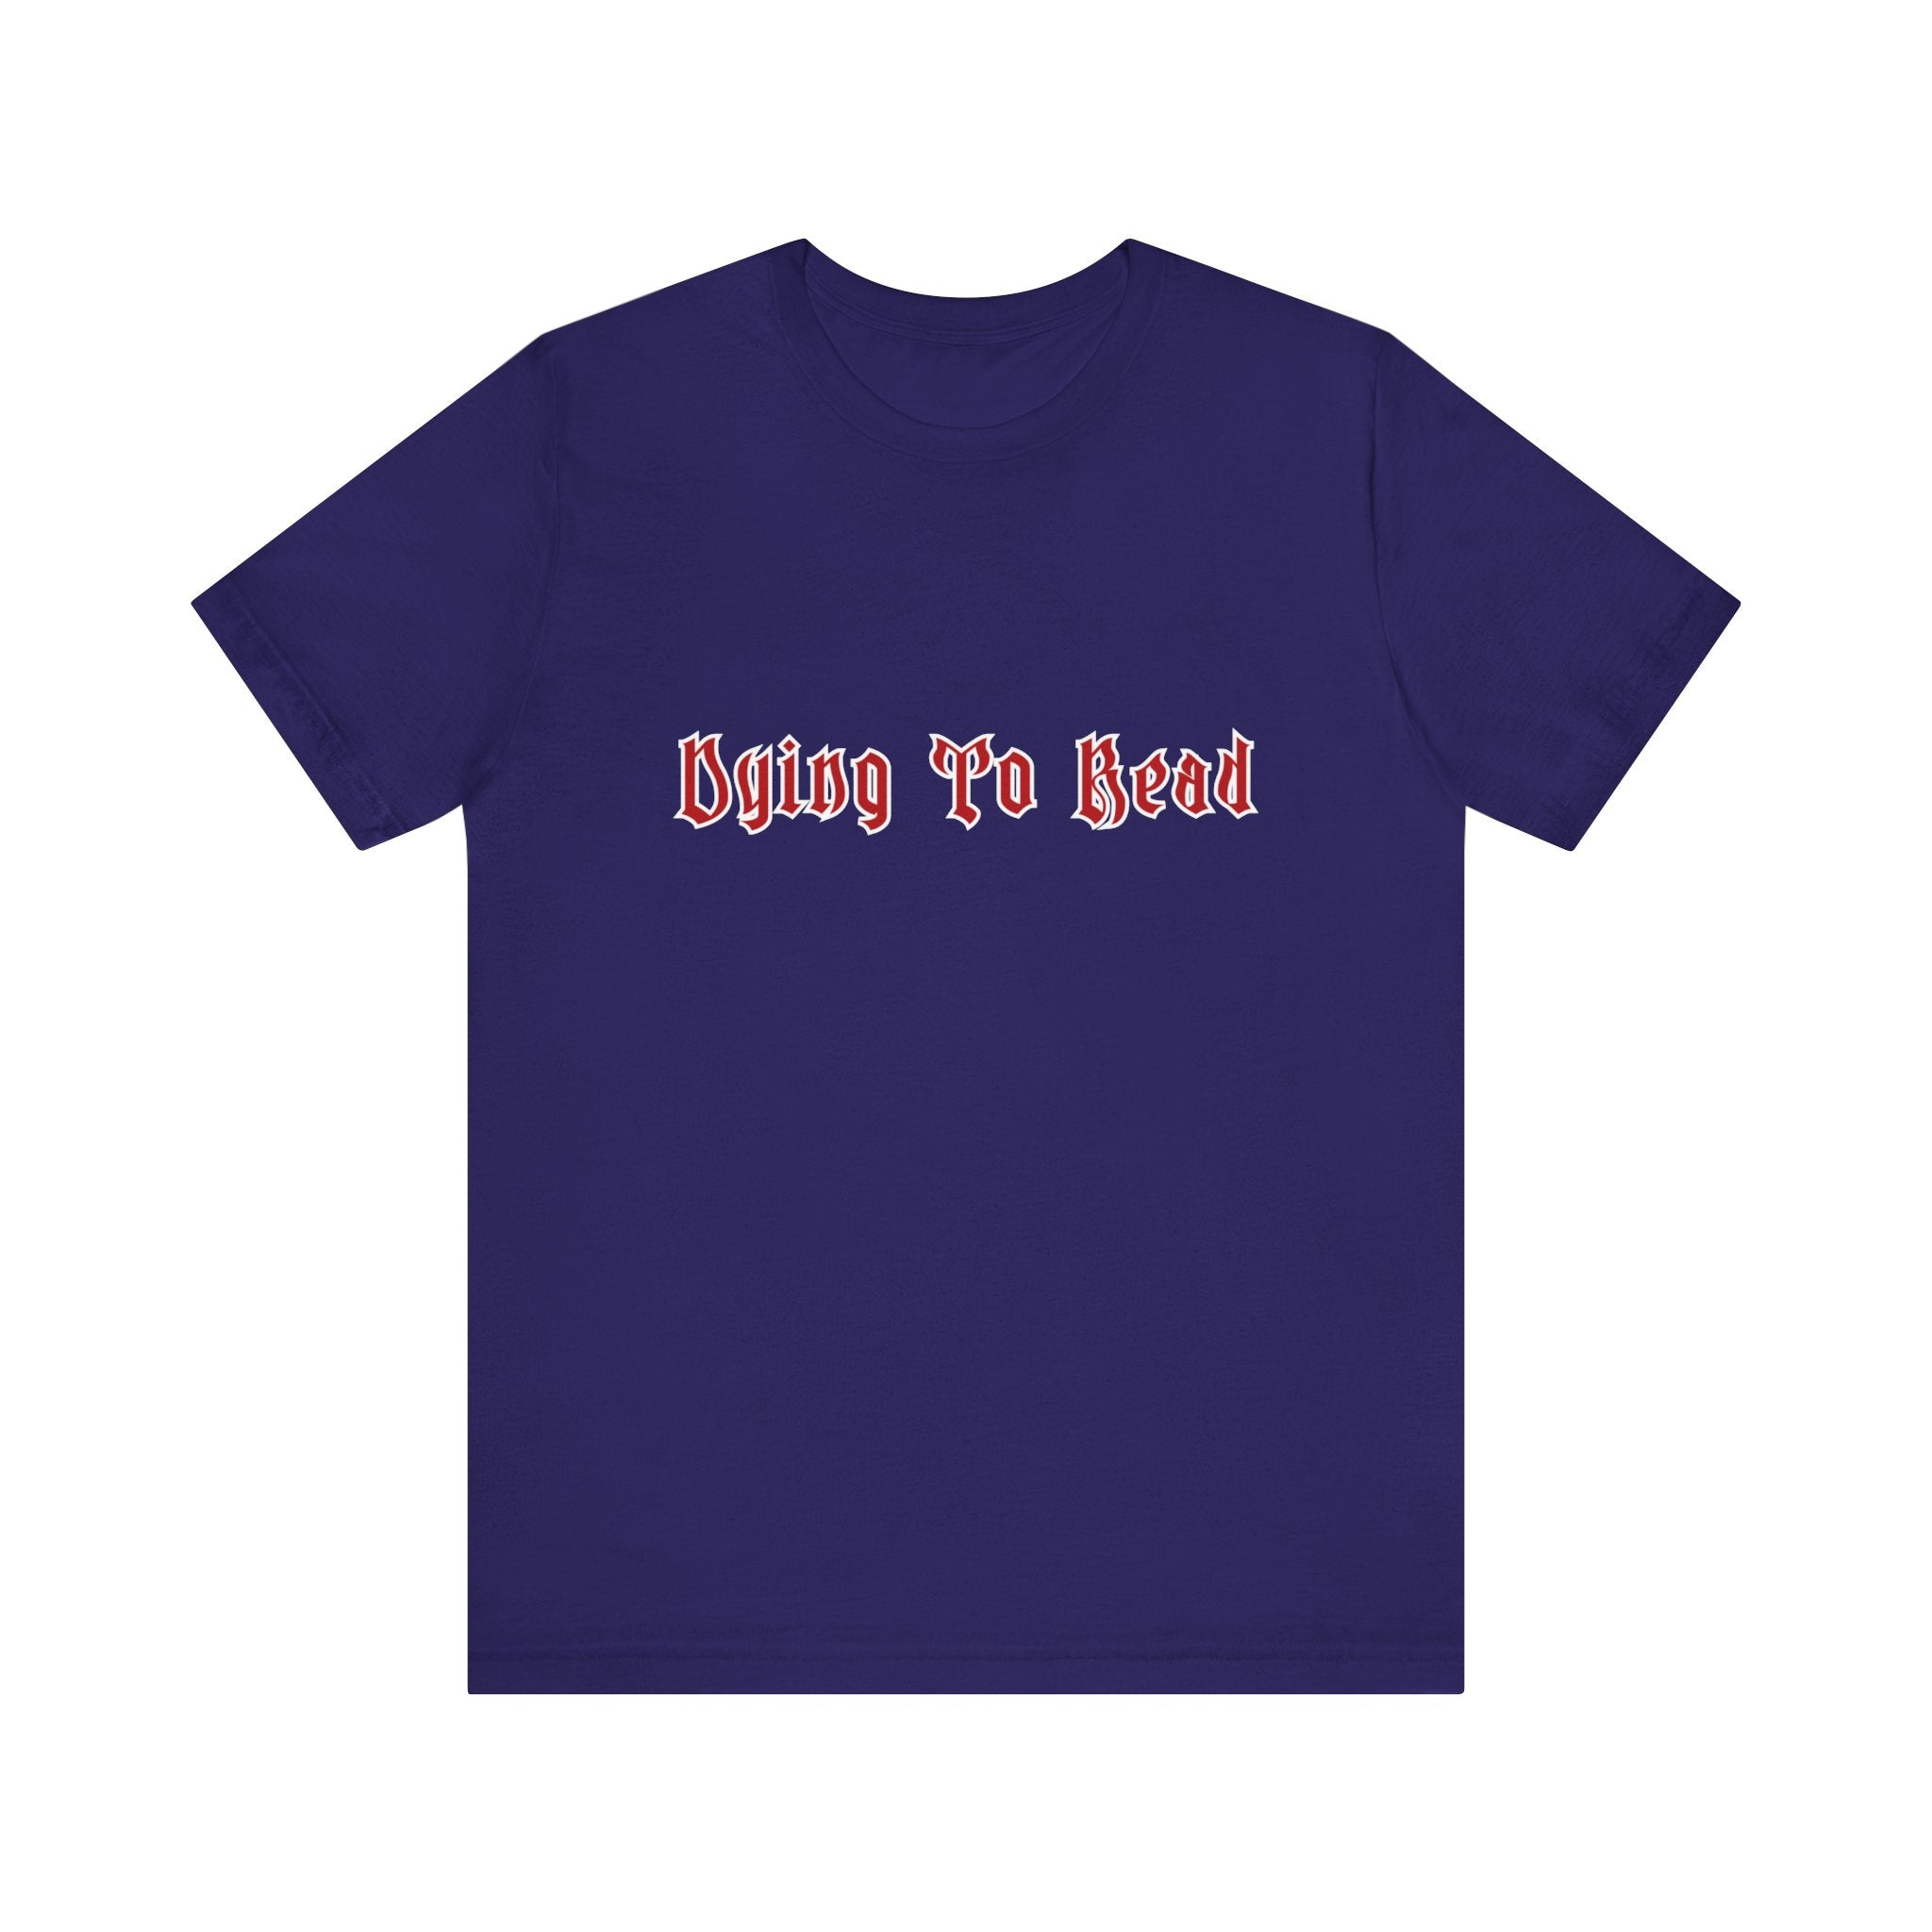 Dying to Read Tee